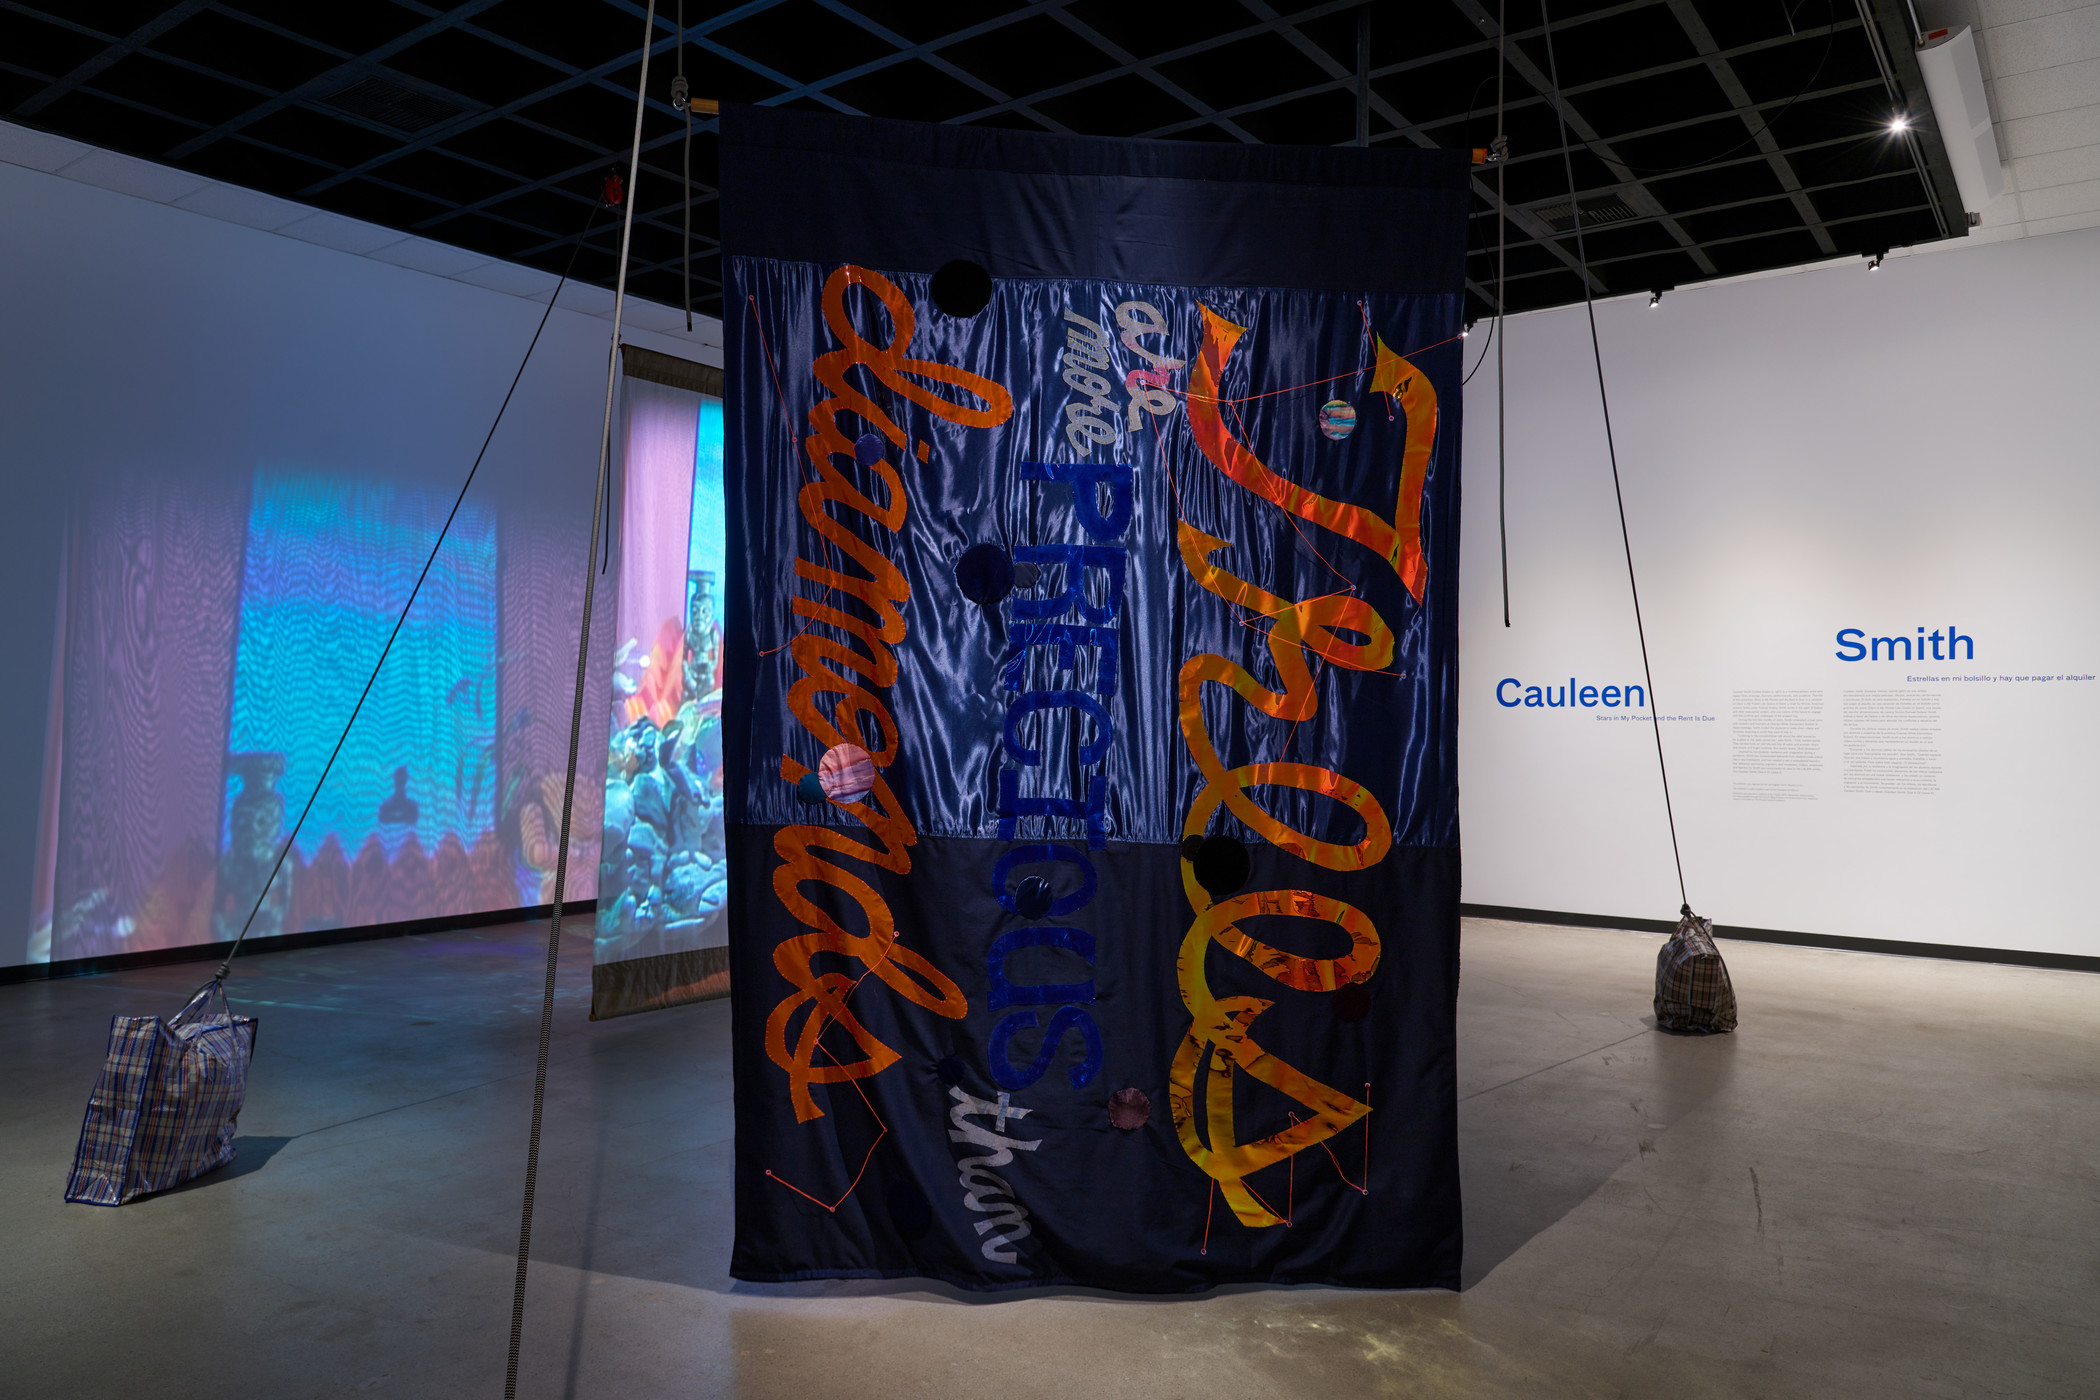 Installation view of embellished banner and video in gallery